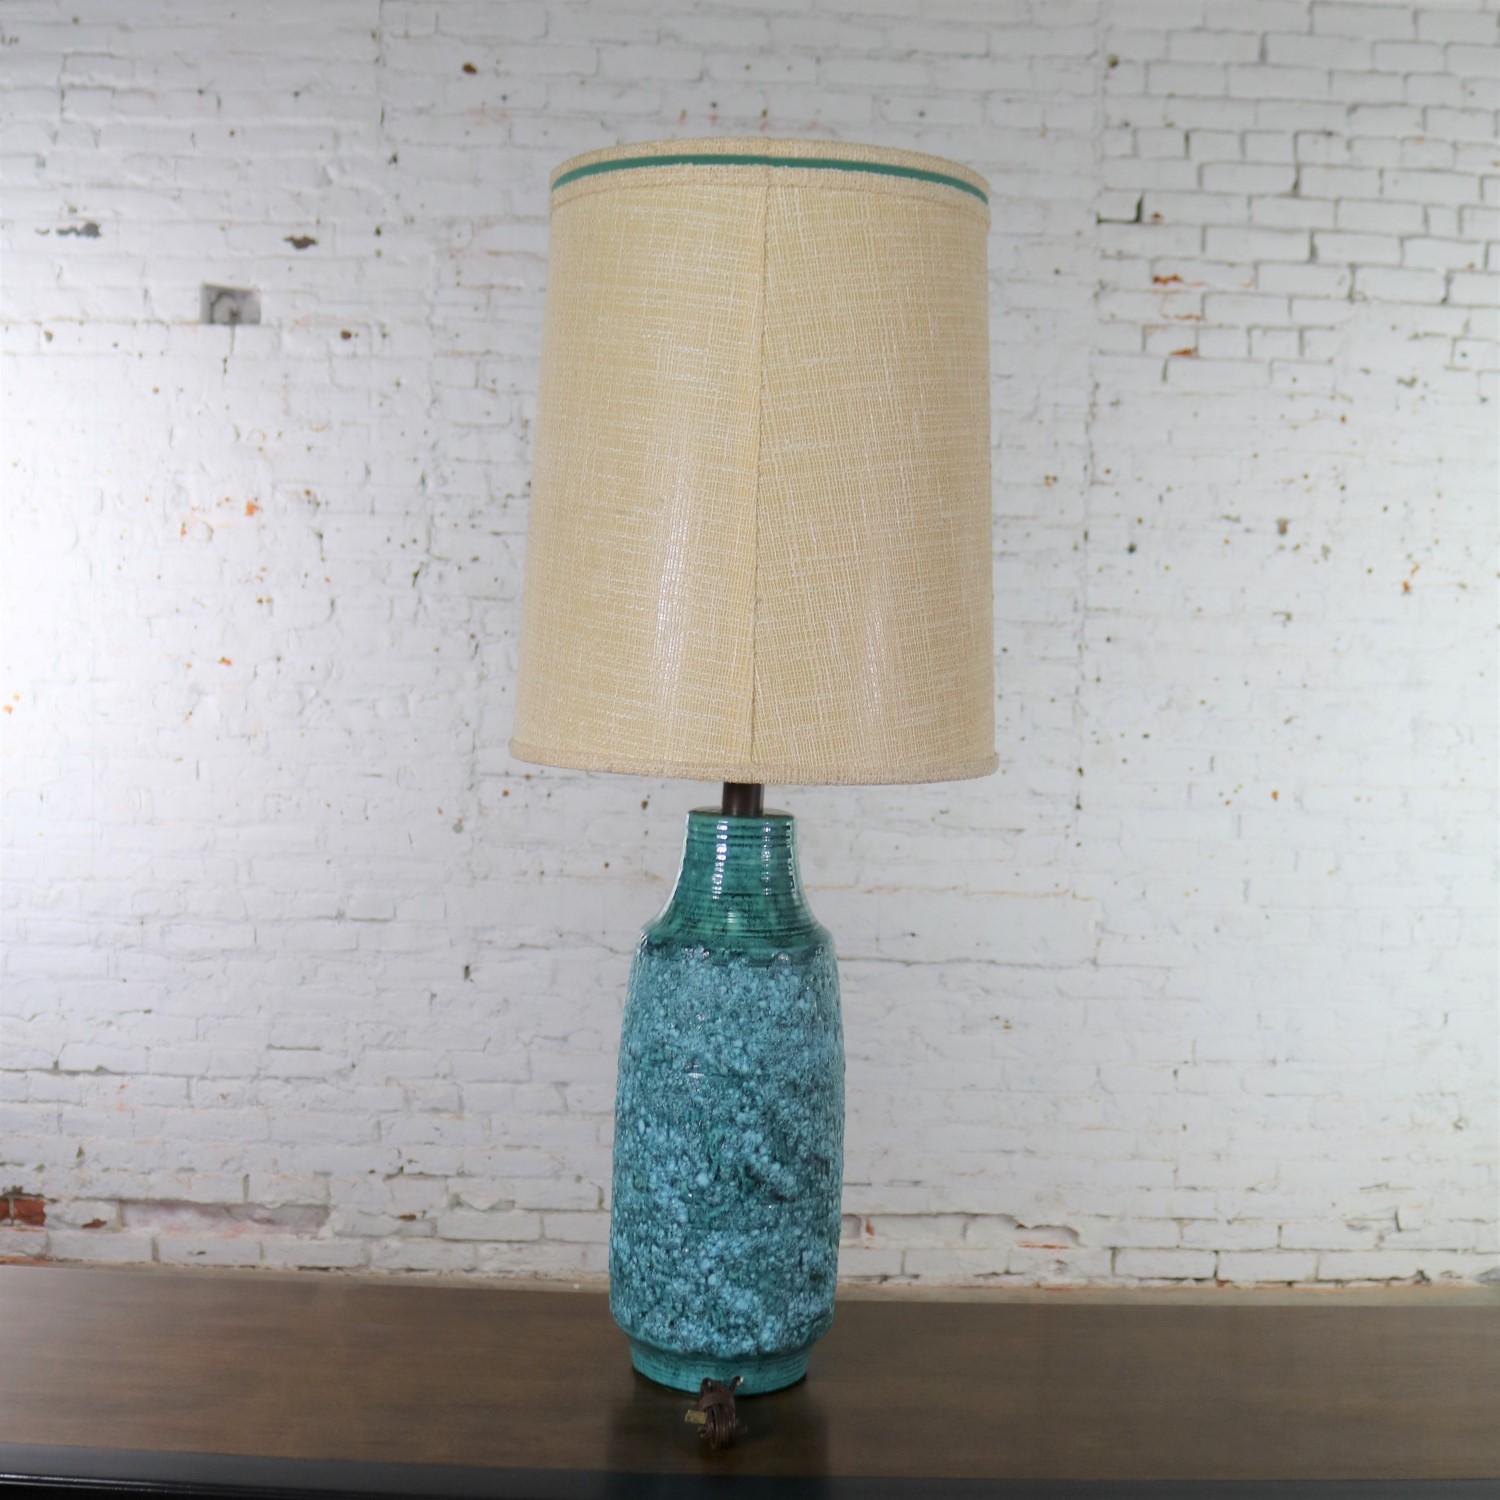 Large Mid-Century Modern Turquoise Lava Glaze Ceramic Table Lamp after Fantoni In Good Condition For Sale In Topeka, KS